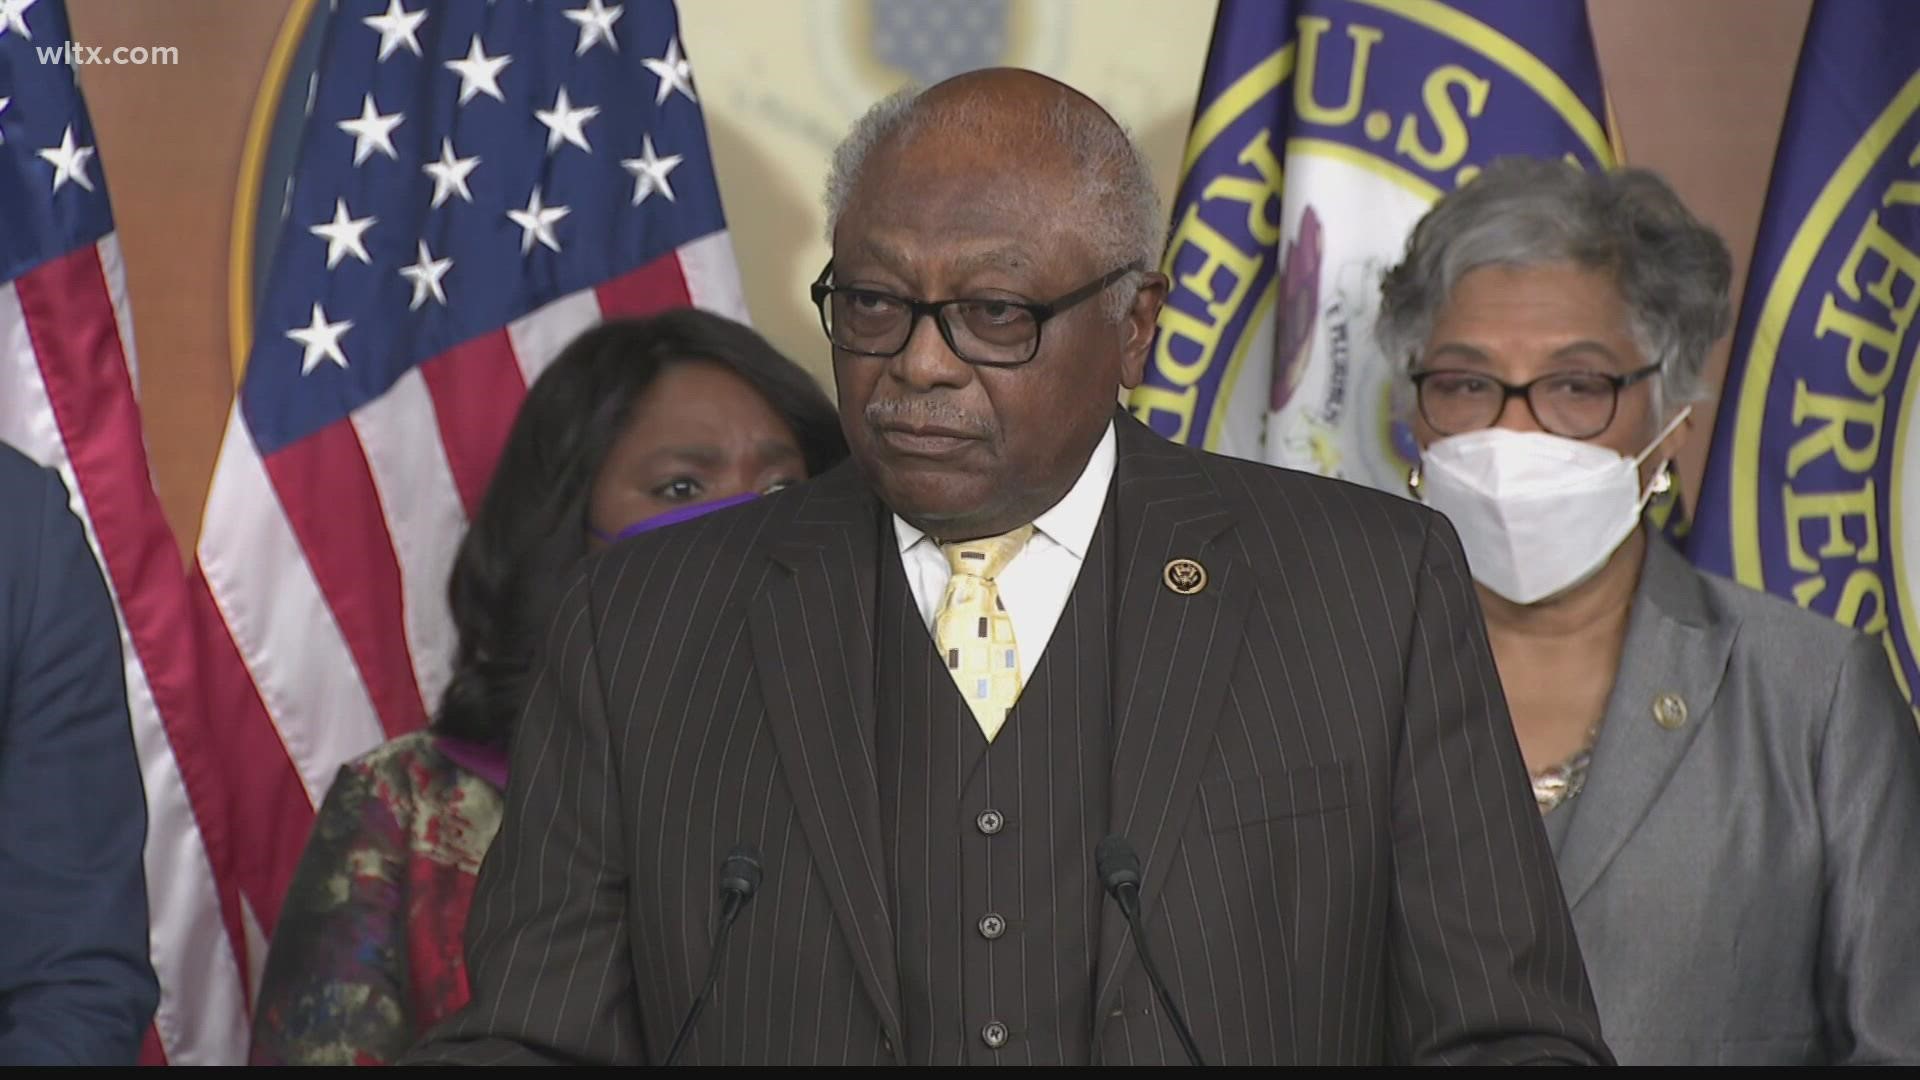 Sen. Clyburn said it's important to pass the bills even without bi-partisian support.